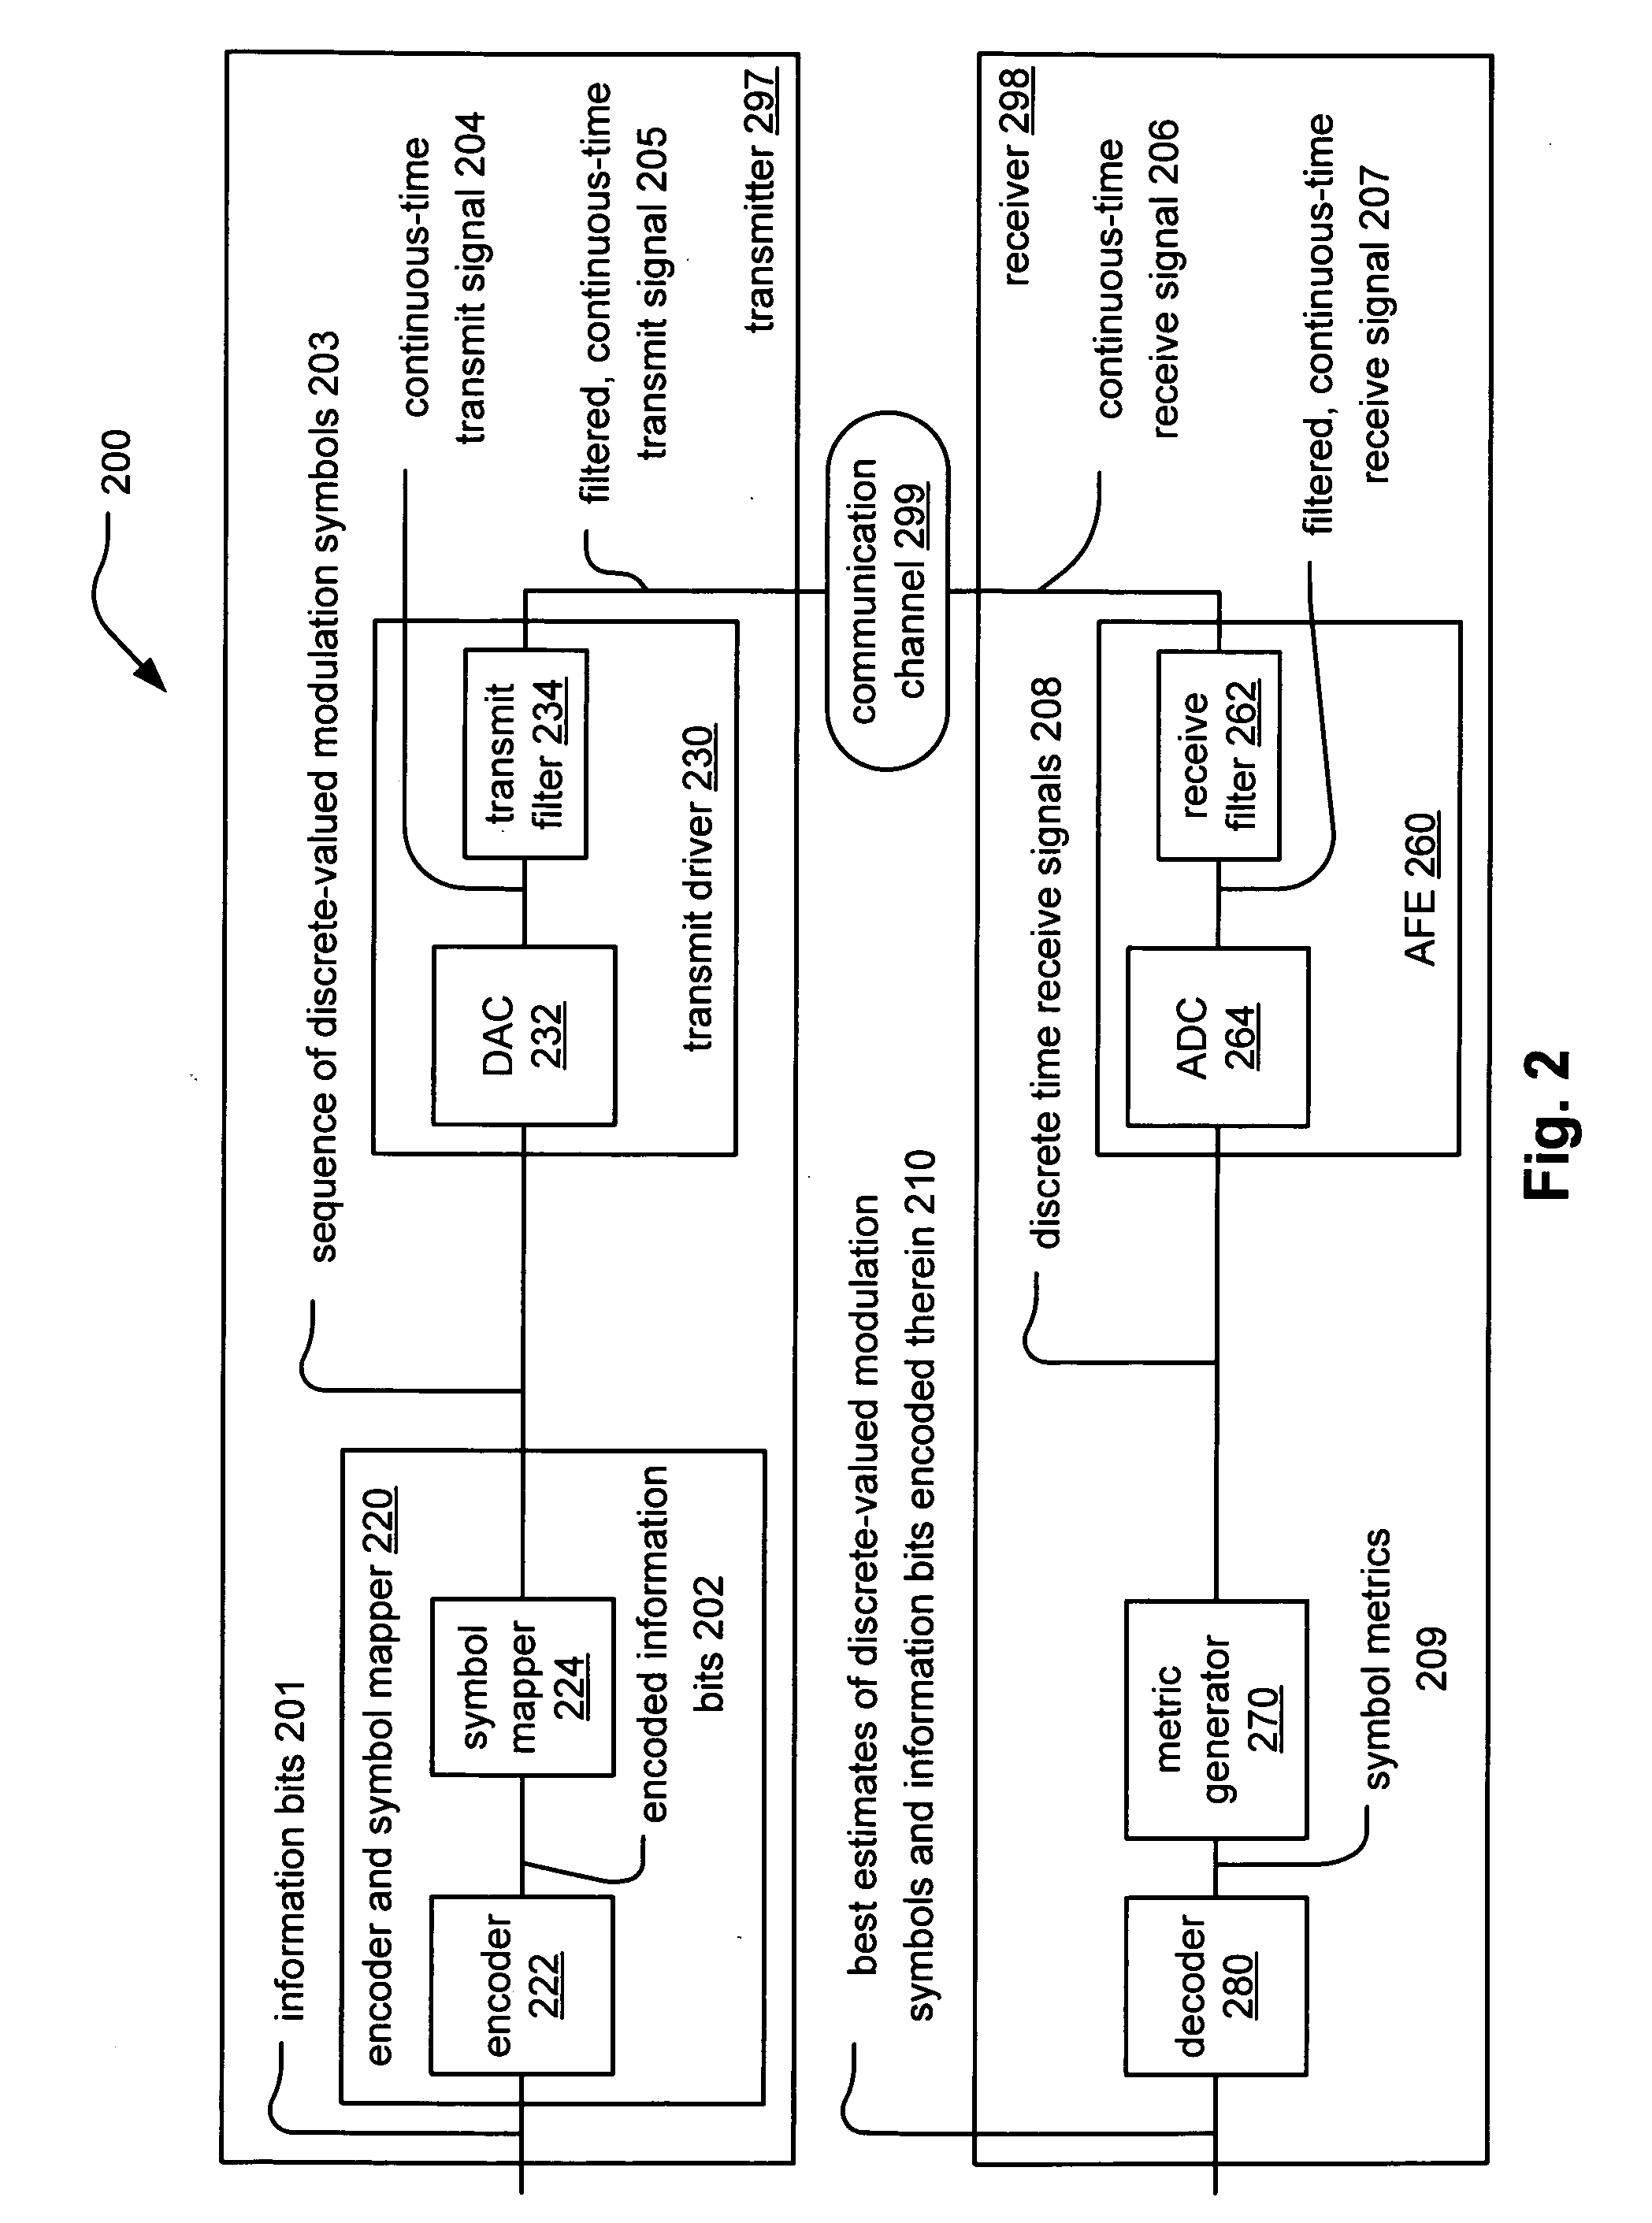 Message passing memory and barrel shifter arrangement in LDPC (Low Density Parity Check) decoder supporting multiple LDPC codes